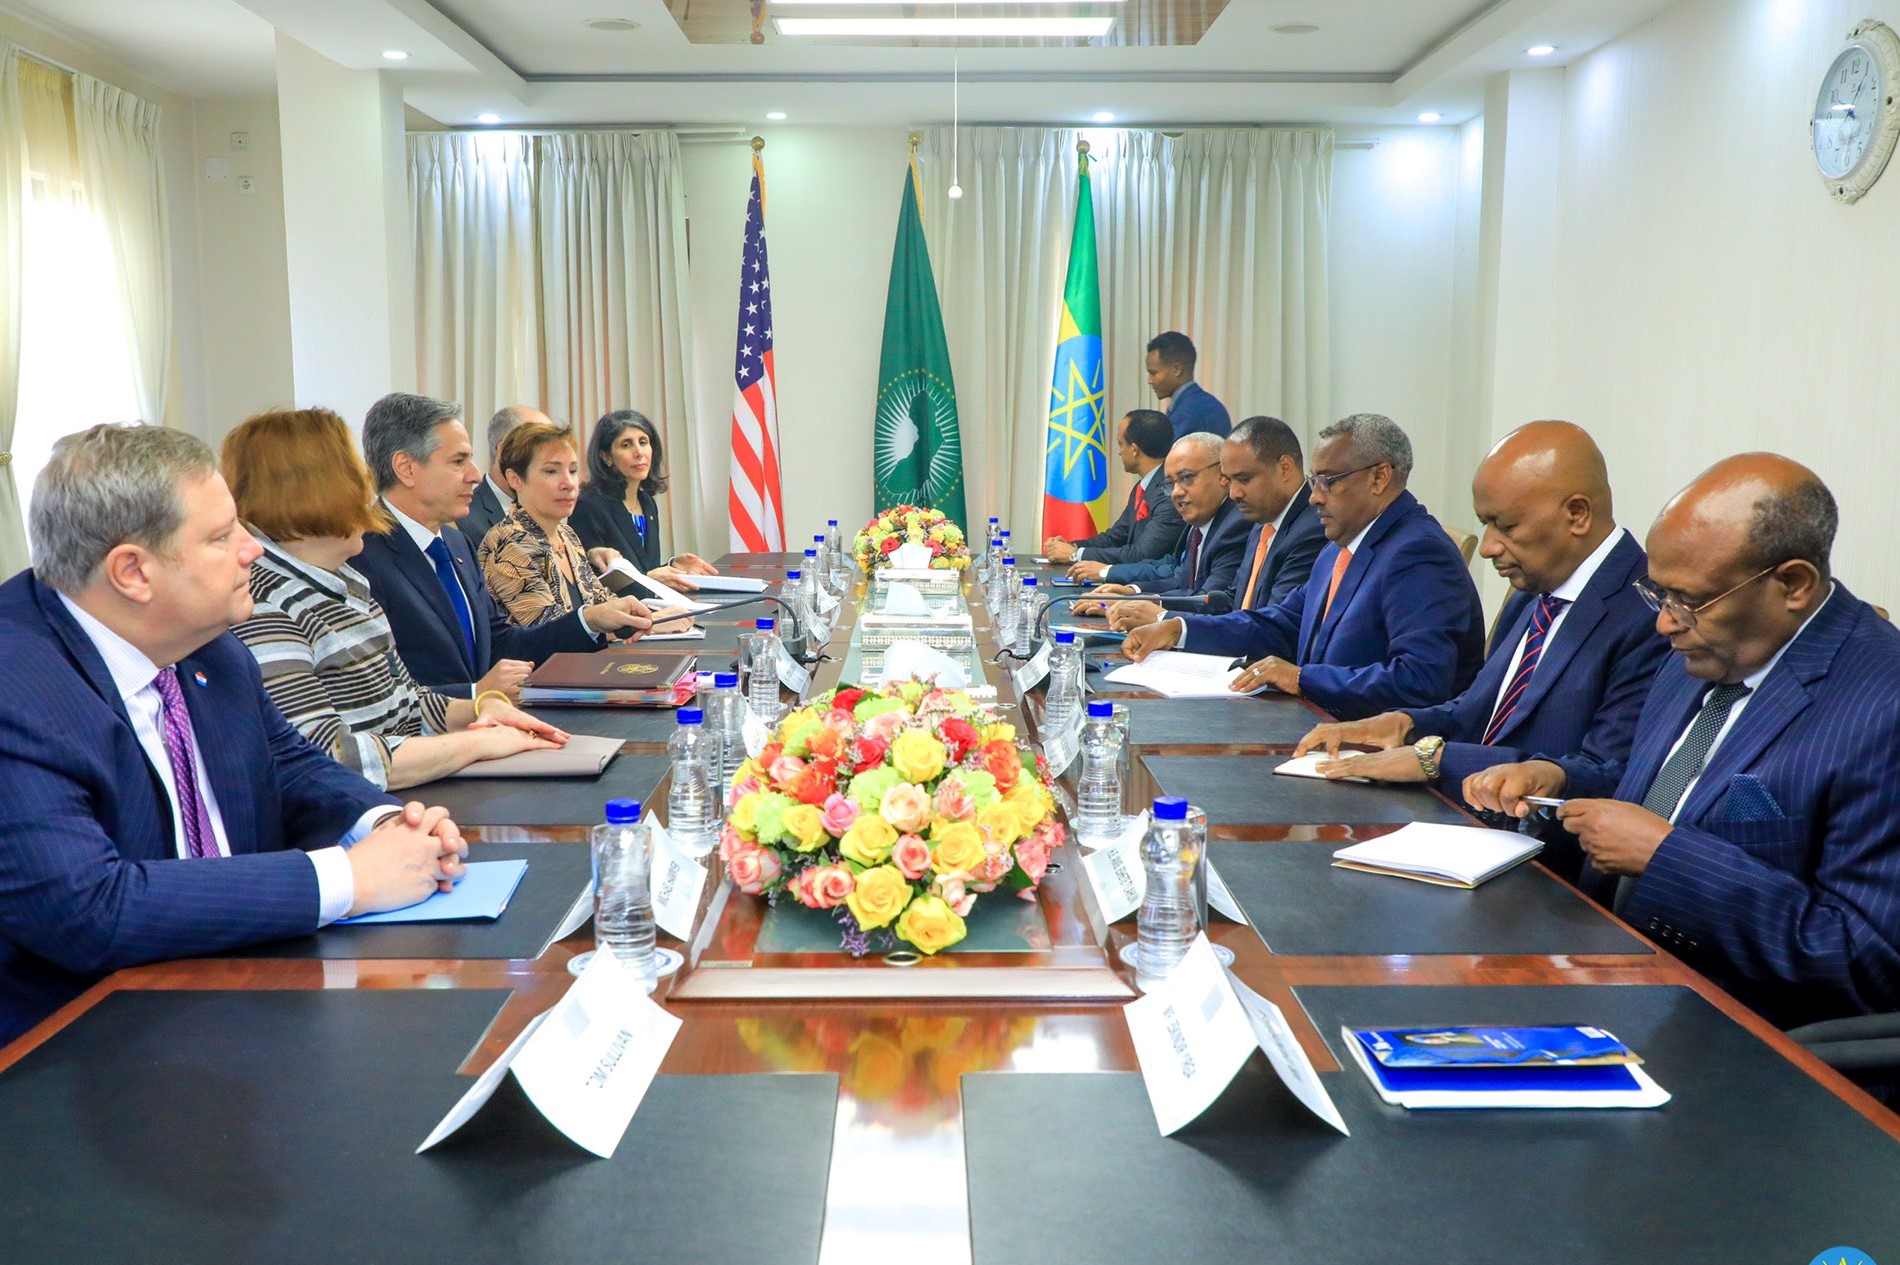 U.S. diplomatic delegation led by Secretary of State Anthony Blinken meeting with representatives of Ethiopian government sitting around table.